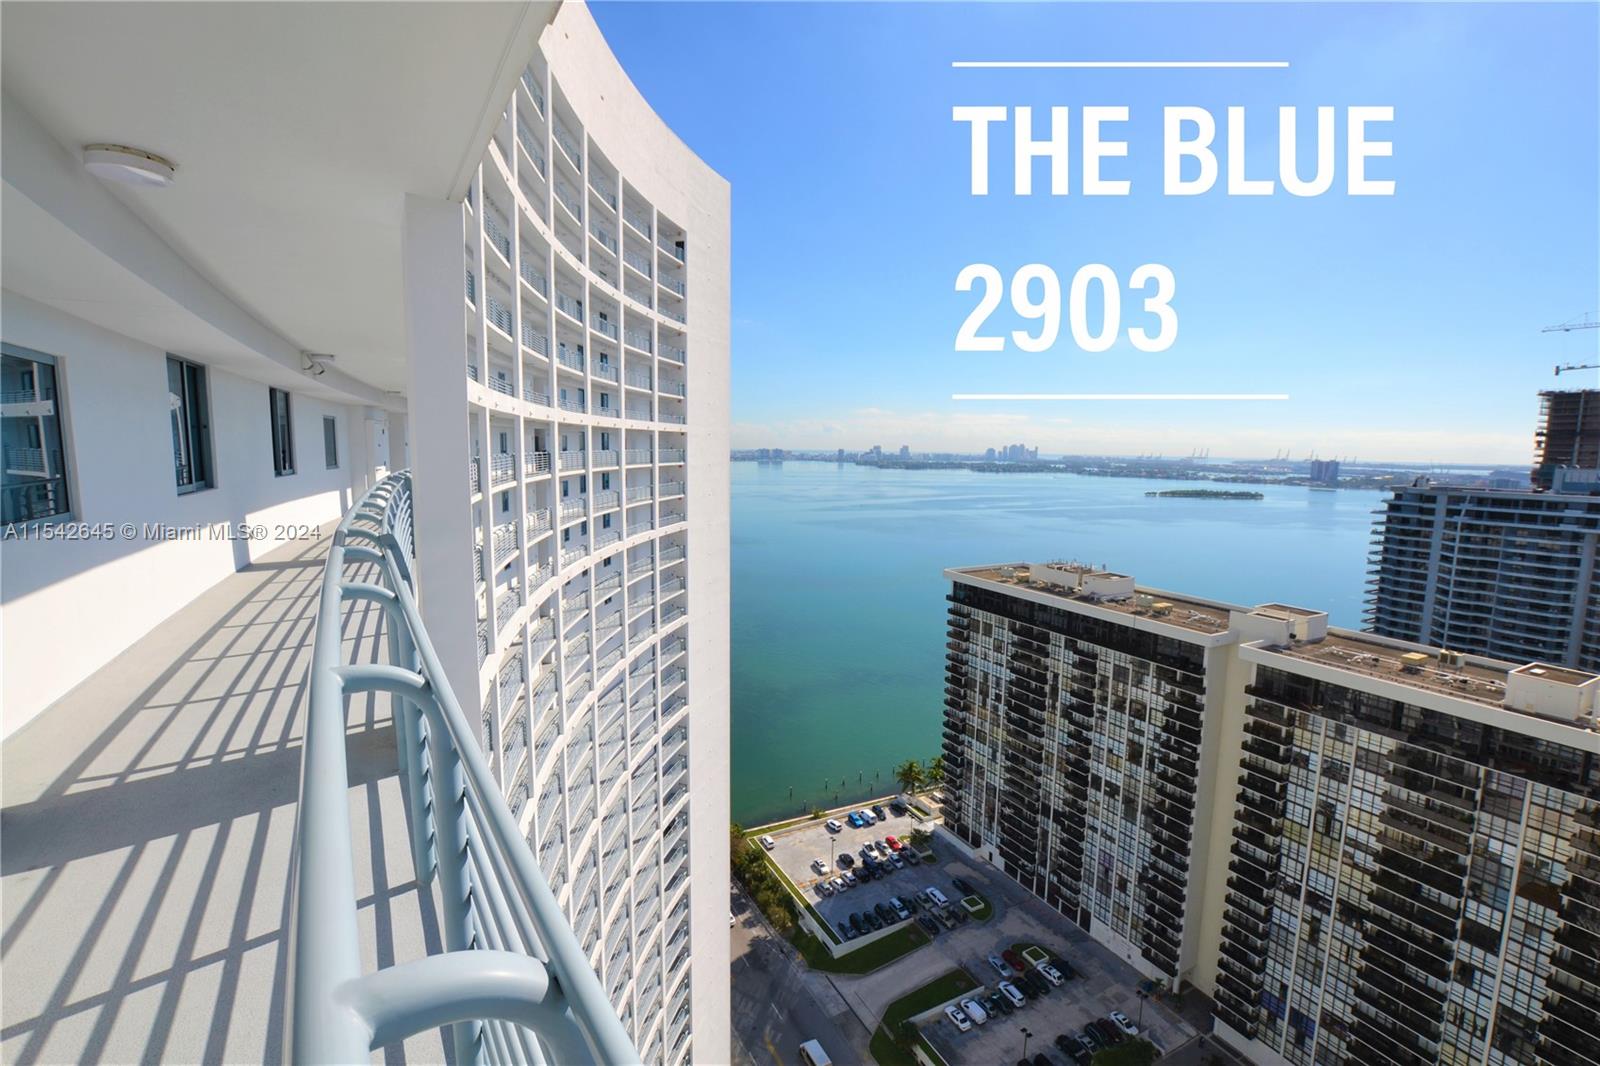 Available for move in May 1, 2024. 2 parking spot, Spectacular 03 Line on HIGH FLOOR, bay and Ocean views from all rooms... with a very well located tandem parking spot (4111) and storage unit (#366). Prime Location, just off of 195, close to South beach, Brickell and Coral Gables, but avoid all the traffic on your commute to work. SPECTACULAR BAY AND OCEAN VIEWS FROM BOTH ENDS OF THIS FLOW-THROUGH UNIT. MODERN KITCHEN, and CUSTOM CLOSETS. PORCELAIN TILE THROUGHOUT, IMPACT WINDOWS, 2 PARKING SPOTS, LARGE BALCONY, CENTRAL HOT WATER.  Rapid association approval. Unit is NOT Furnished, only in photos.